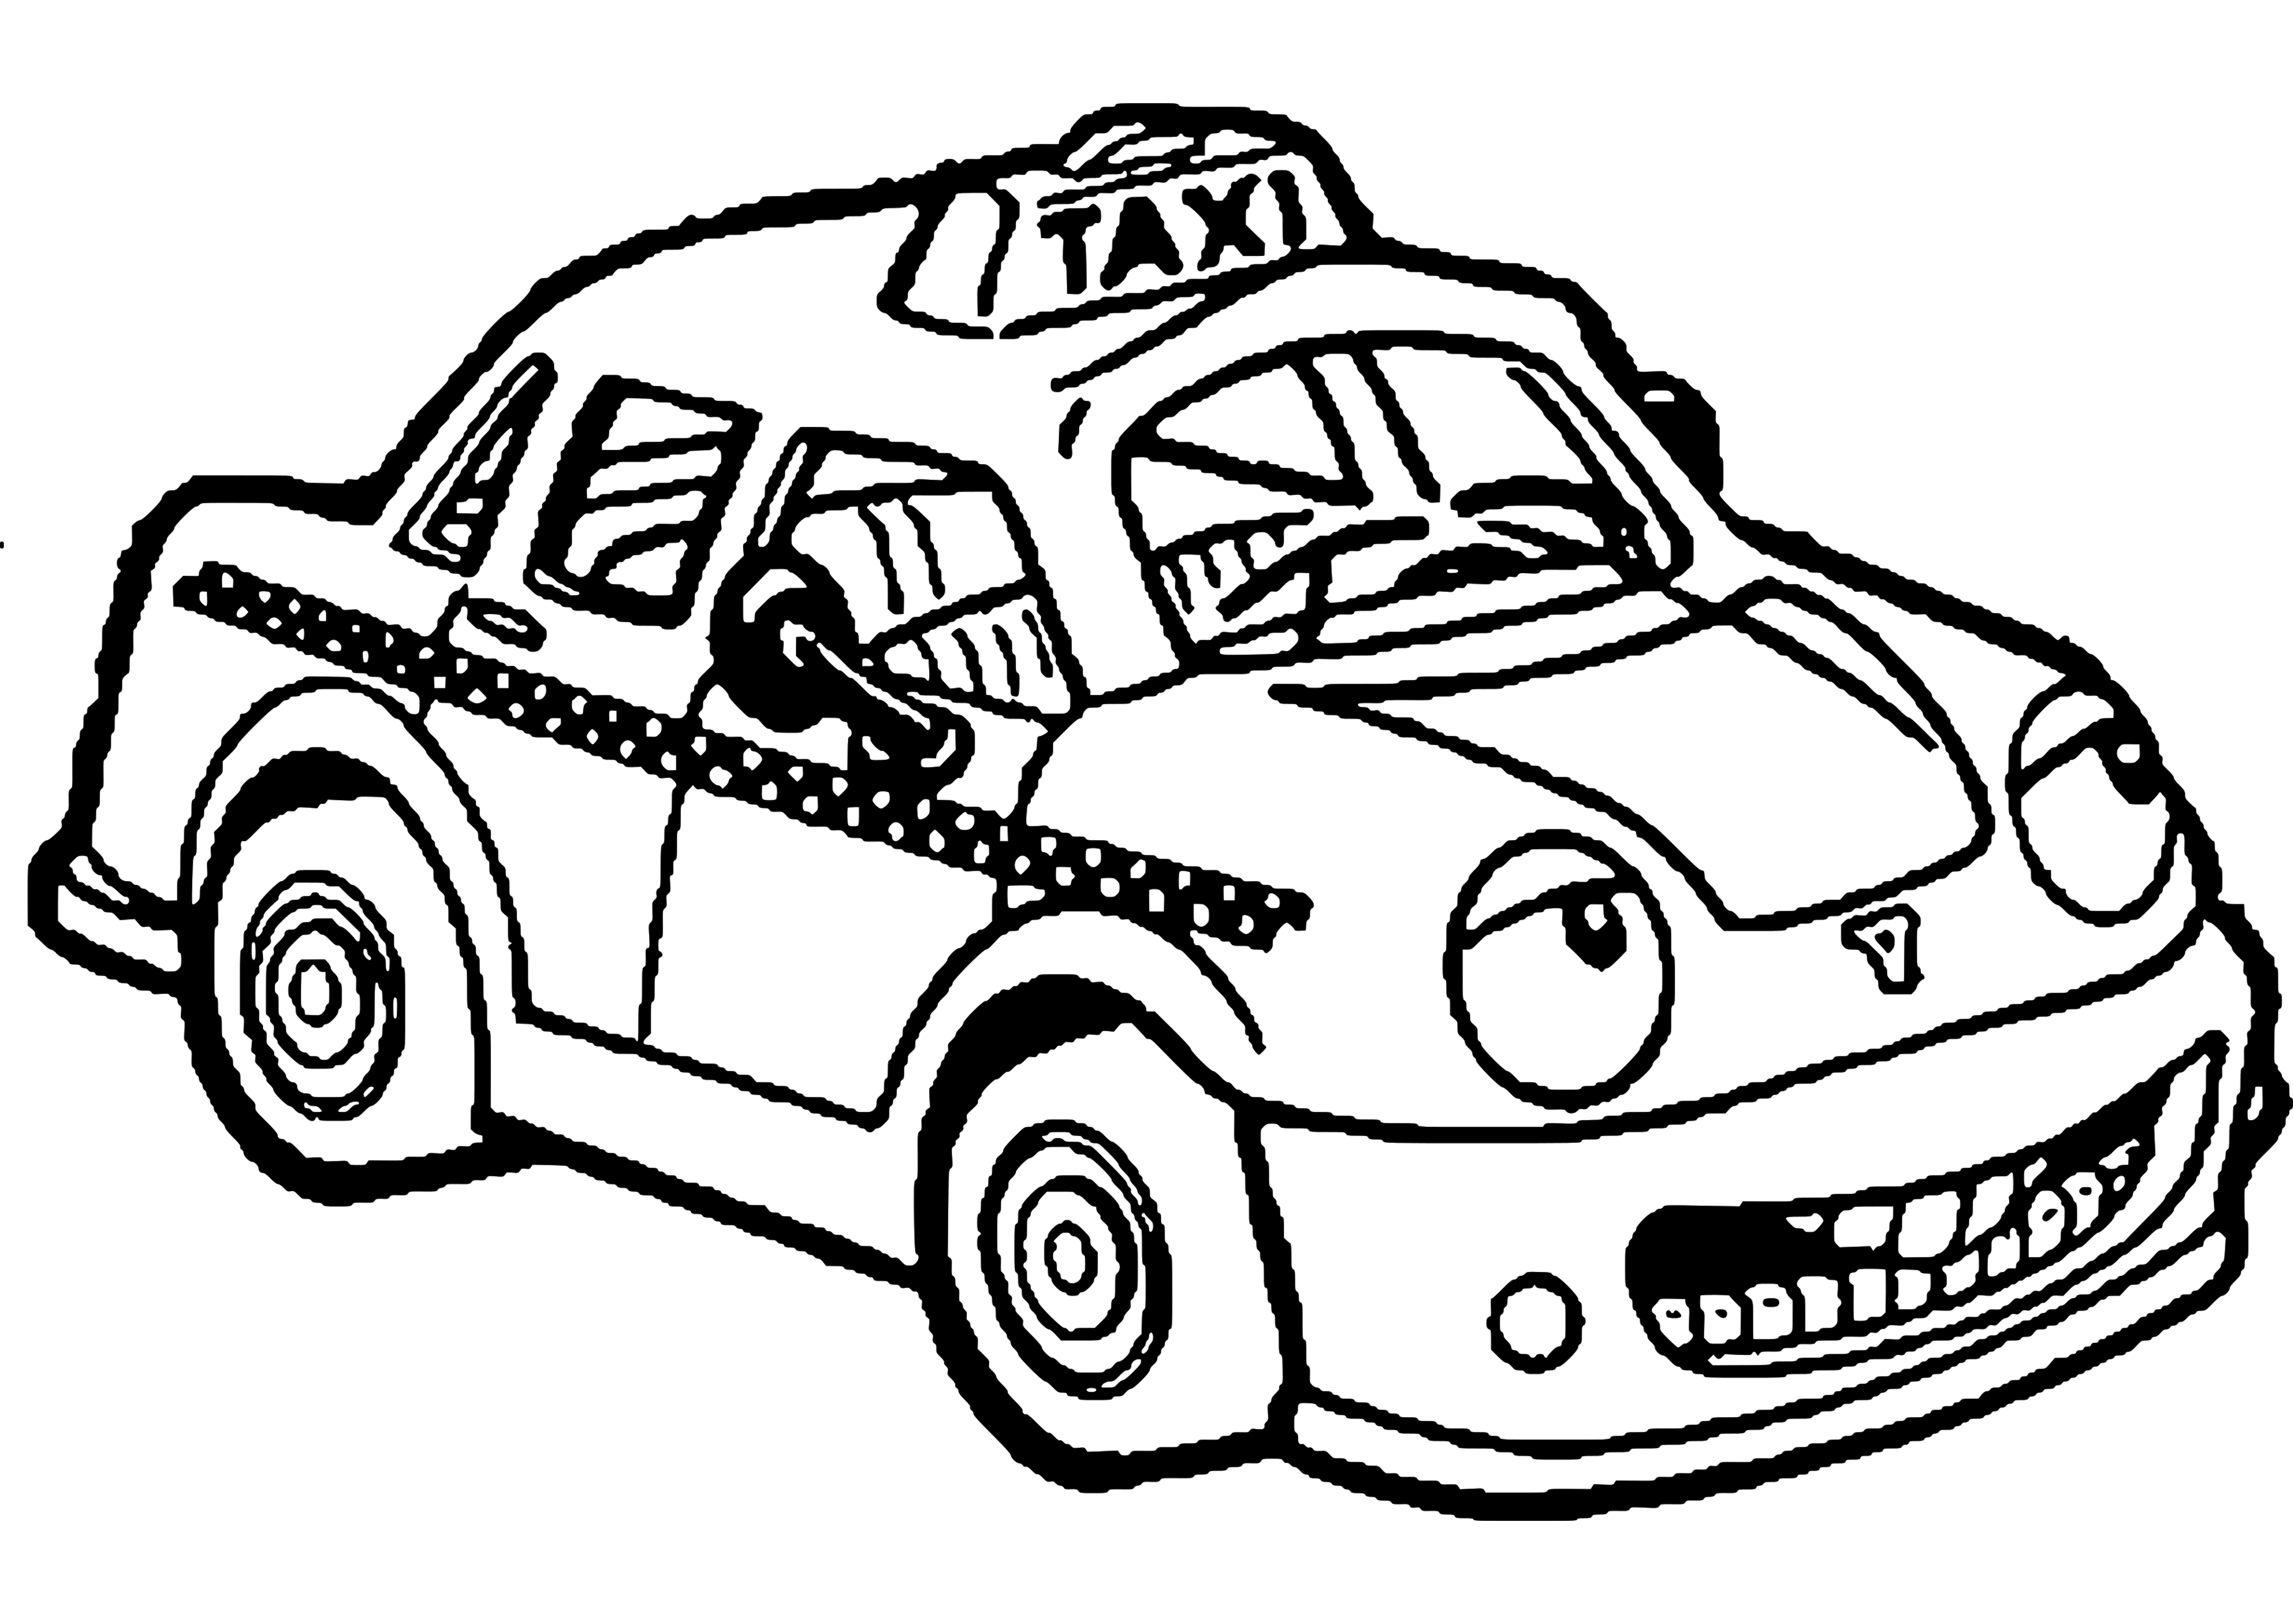 Download Taxi (Transportation) - Printable coloring pages